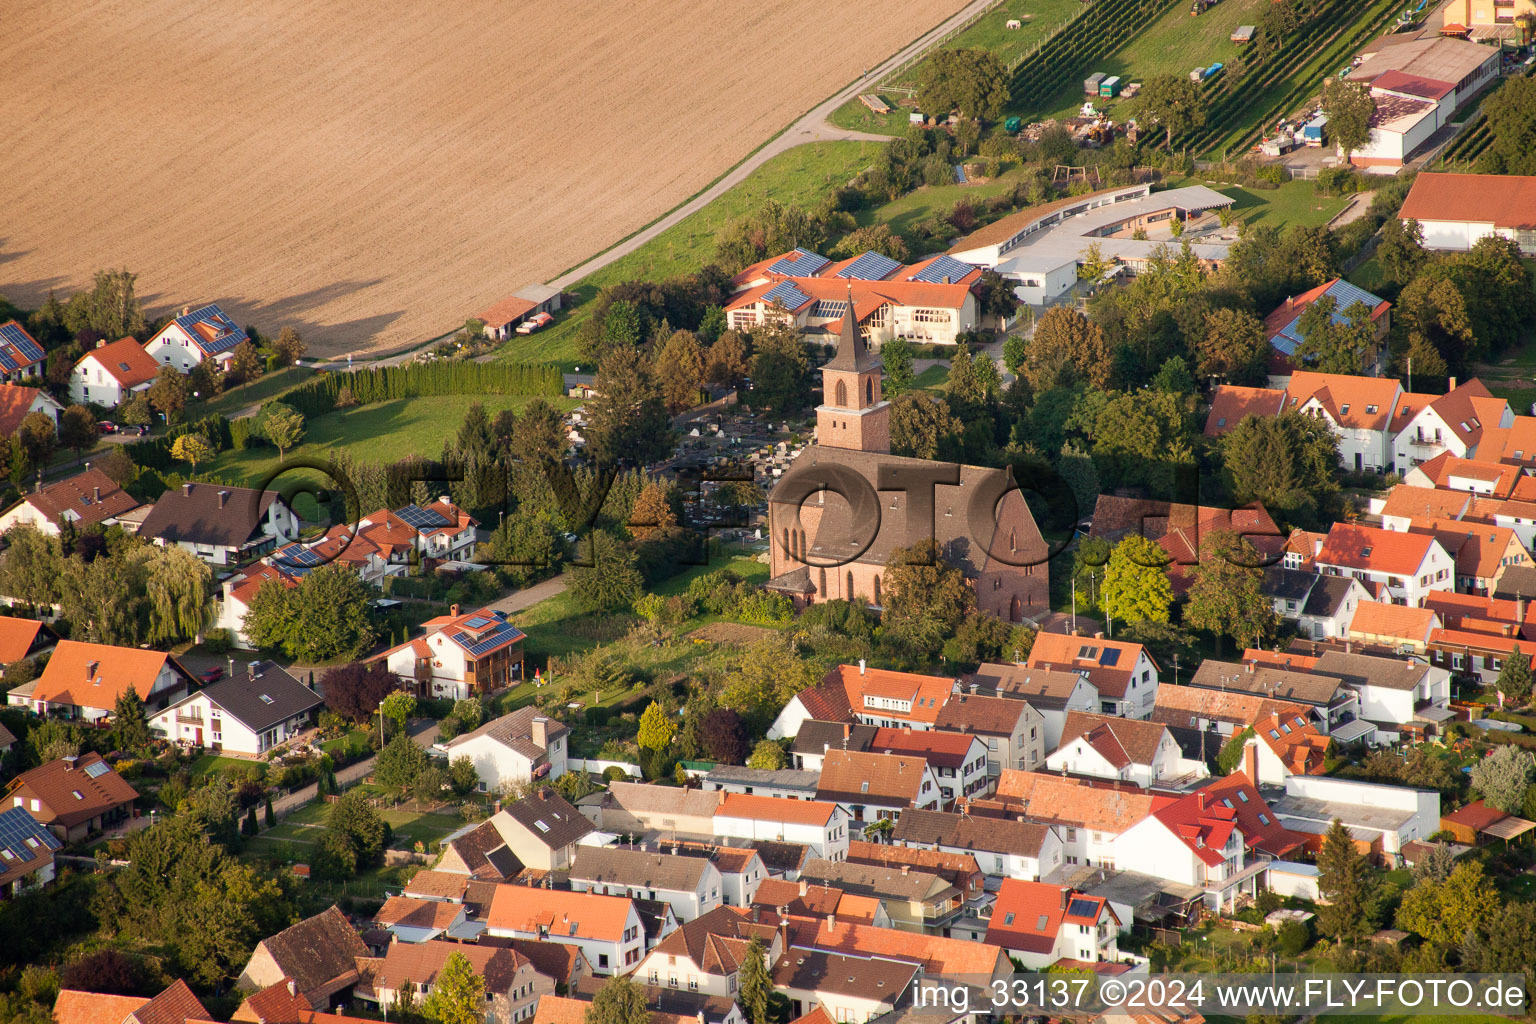 Aerial view of Church building in the village of in Essingen in the state Rhineland-Palatinate